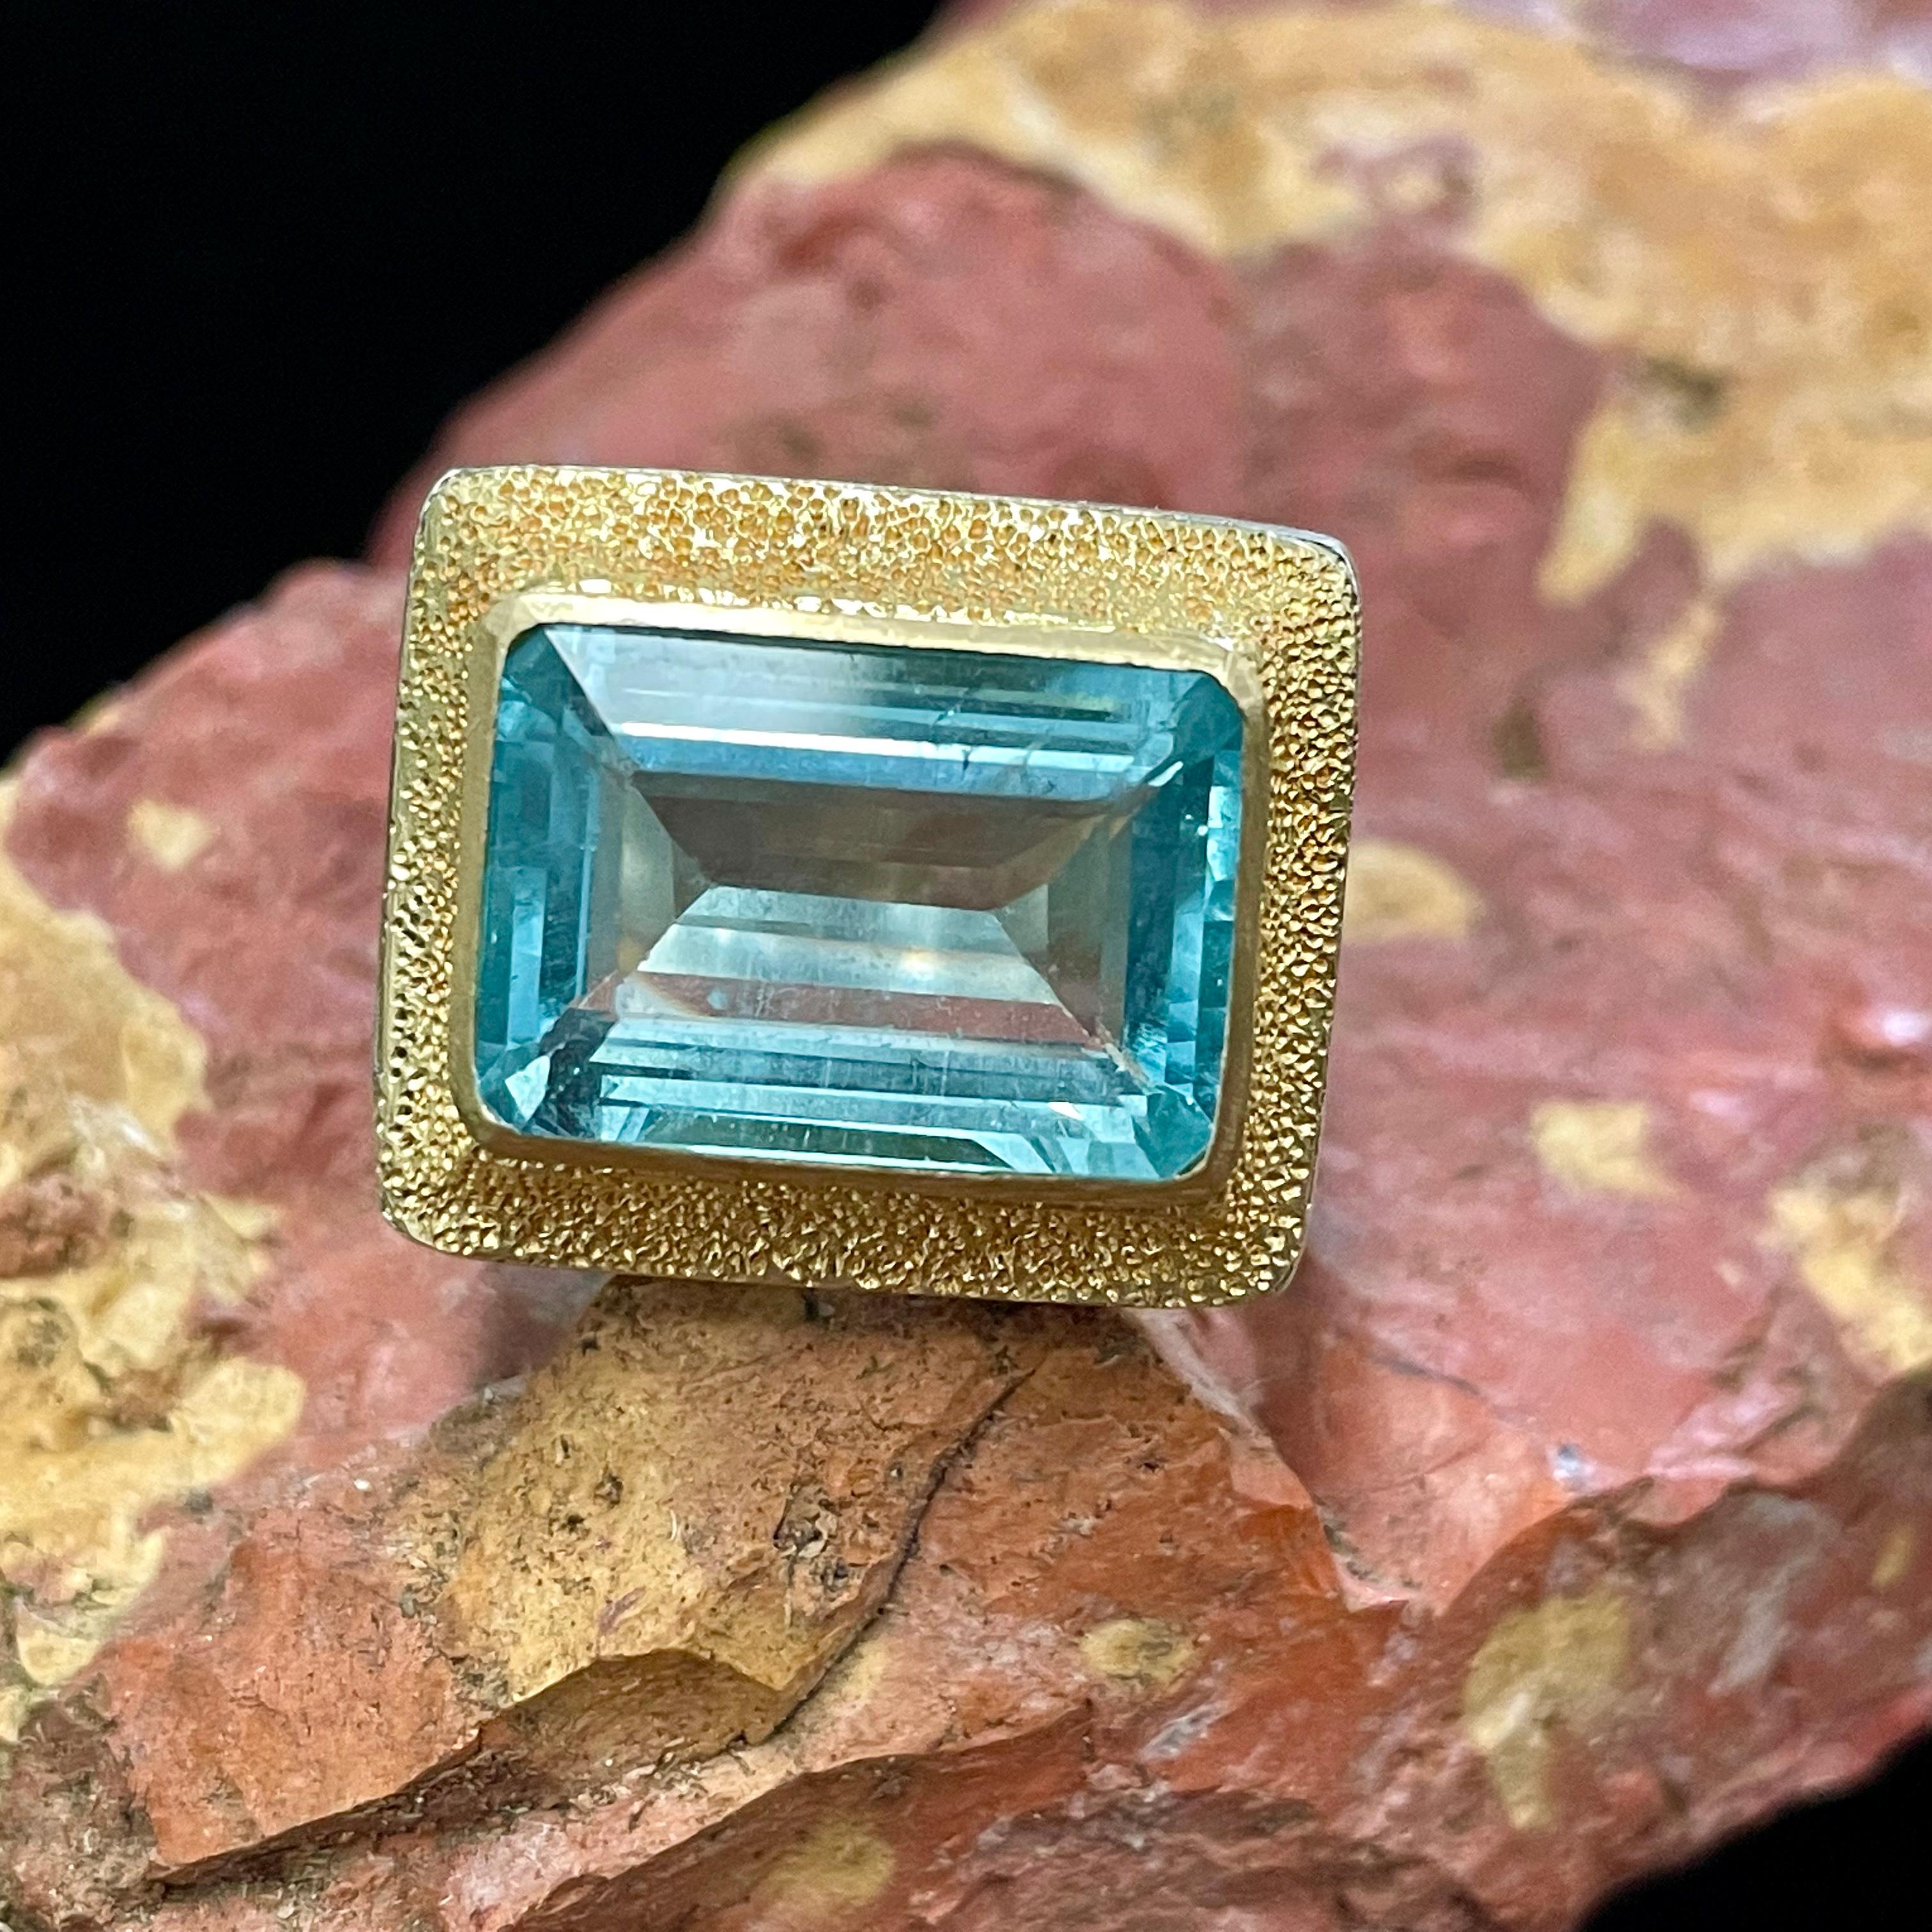 An octagonal 11x15 mm Brazilian Aquamarine surrounded by hand textured gold is the centerpiece of this Steven Battelle gold/silver creation. The hammered silver shank is slightly indented on the sides for comfortable wearing.  
Current Size 7.5, but